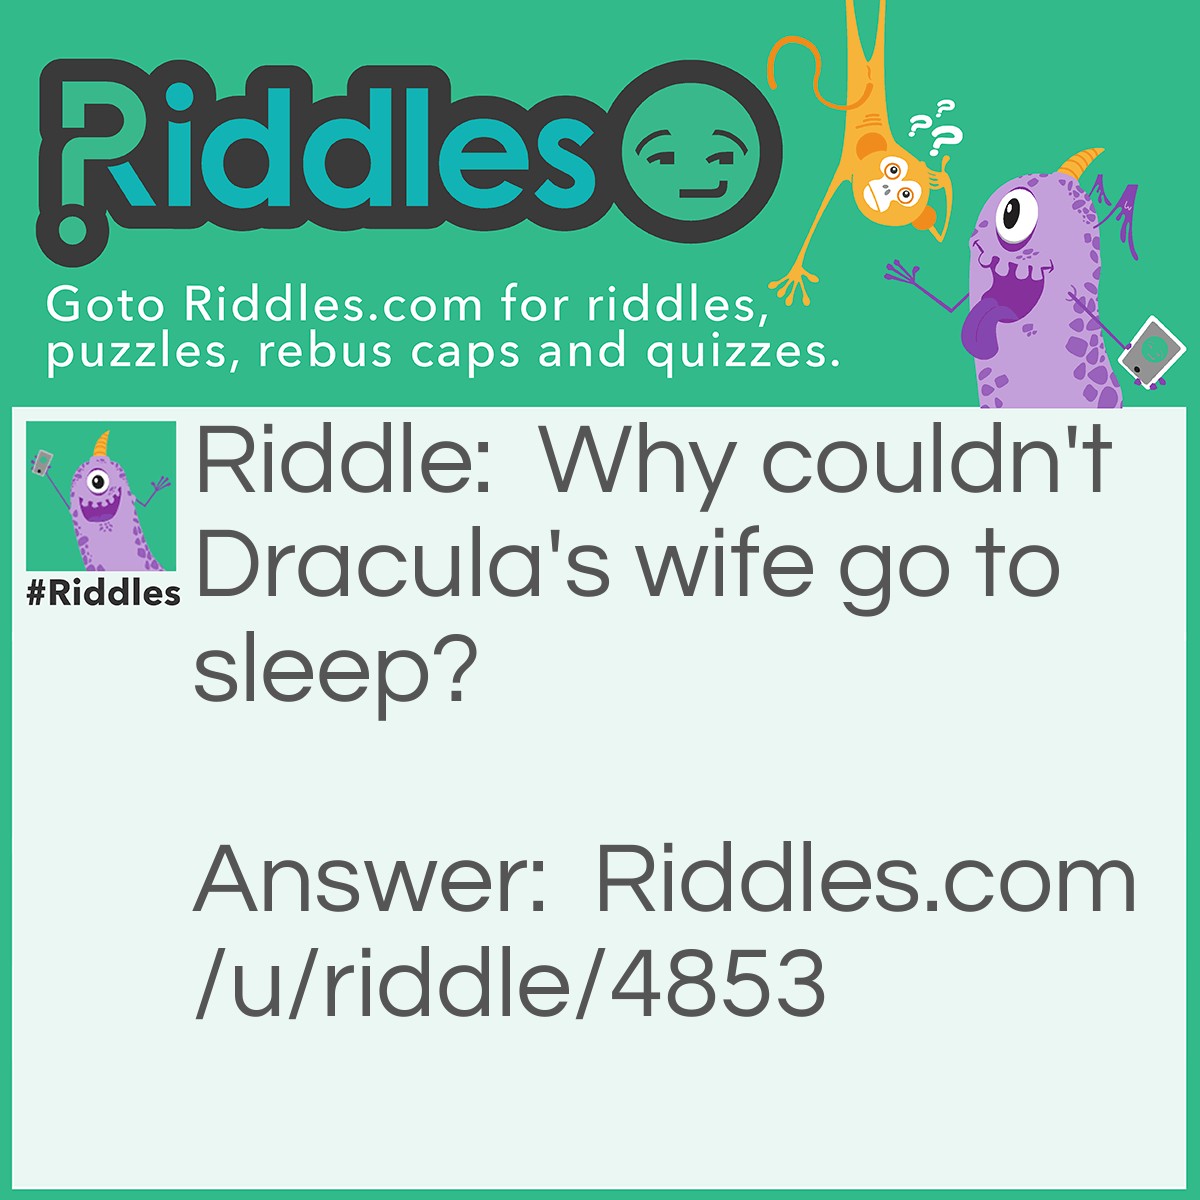 Riddle: Why couldn't Dracula's wife go to sleep? Answer: Because of his "coffin"!